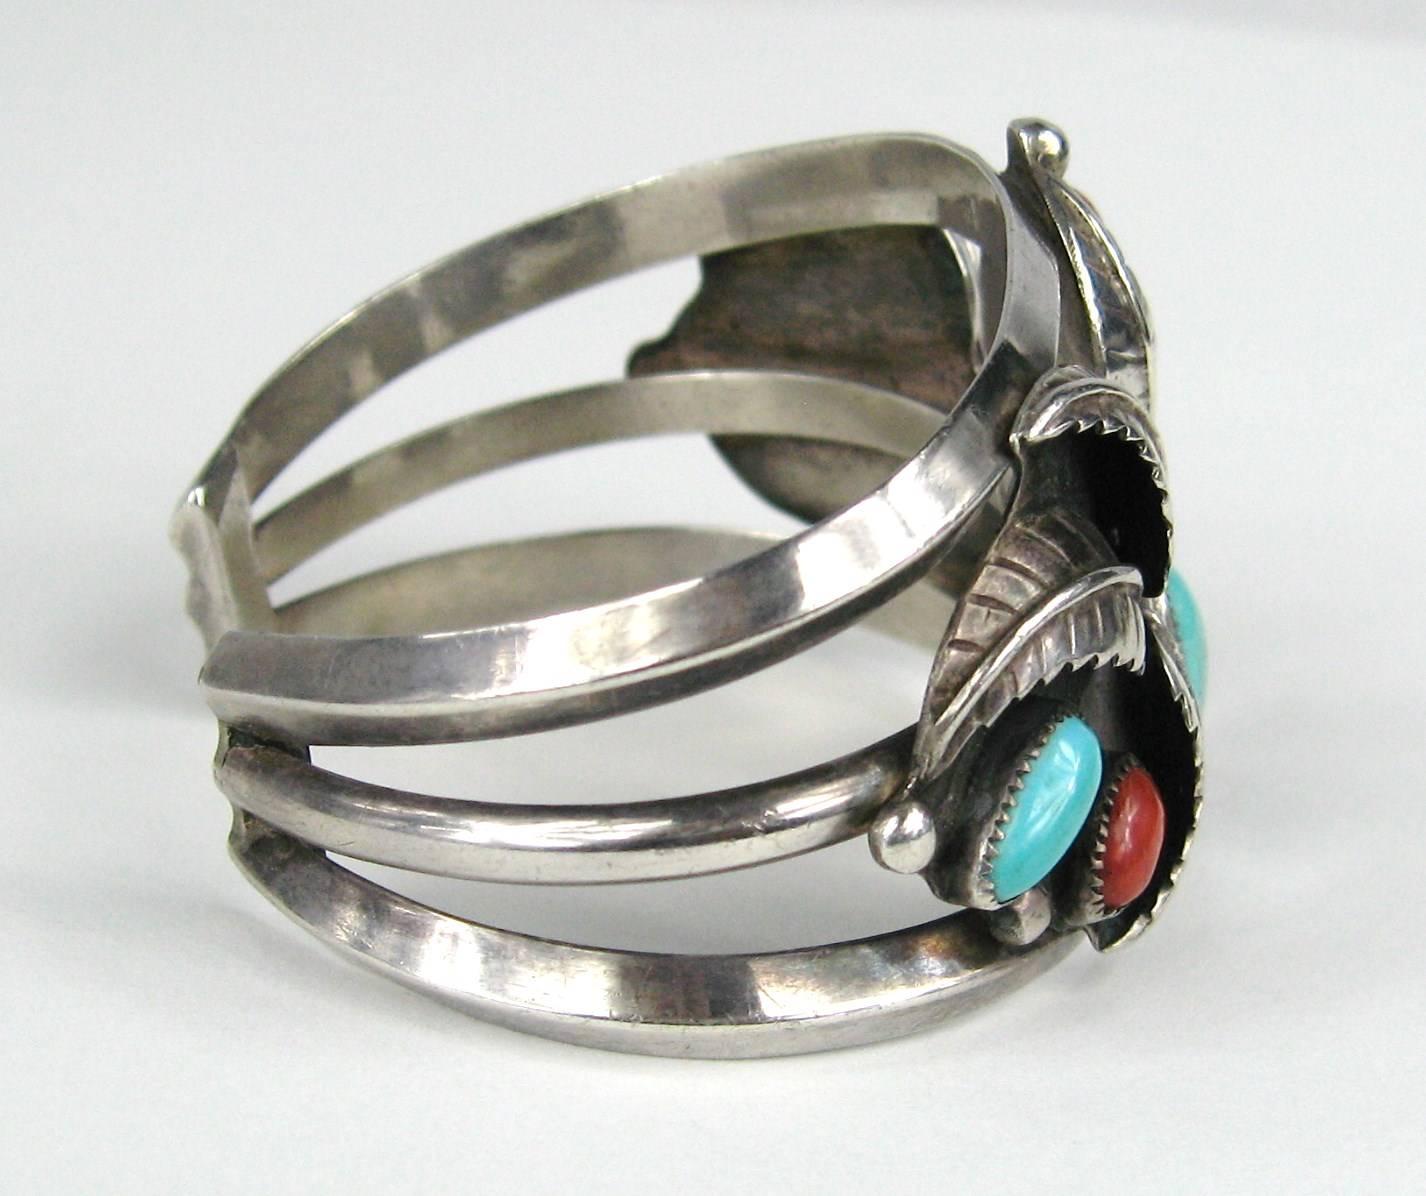 Stunning Old Pawn Sterling bracelet with both Turquoise and Coral bezel set in Sterling. 3 Feathered detailing on bracelet. Early Craftsmanship, simply stunning. Hallmarked Double Feather, early piece. Measuring 1.53